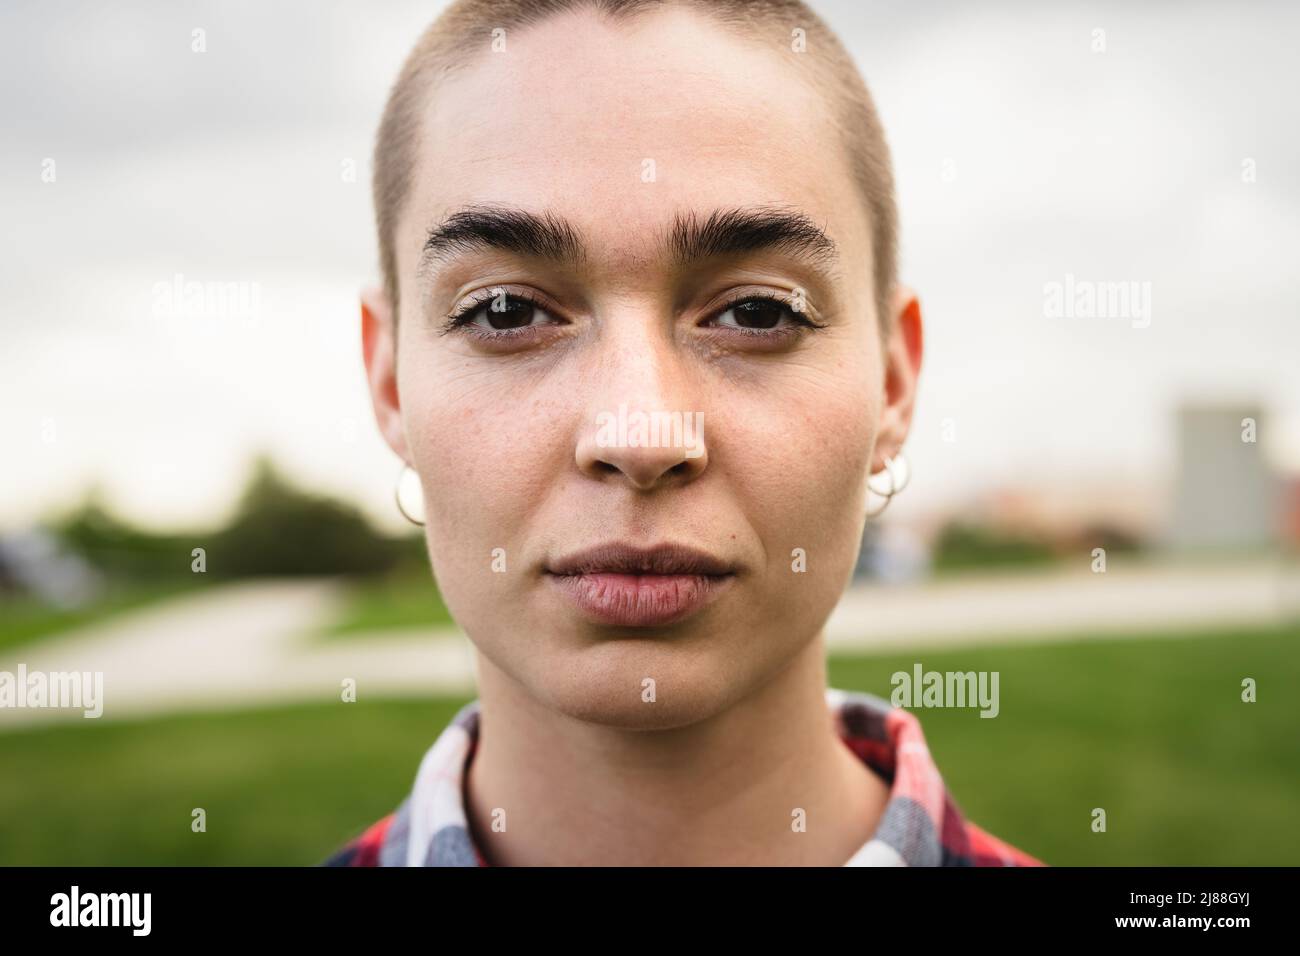 Shaved head girl looking at camera portrait Stock Photo